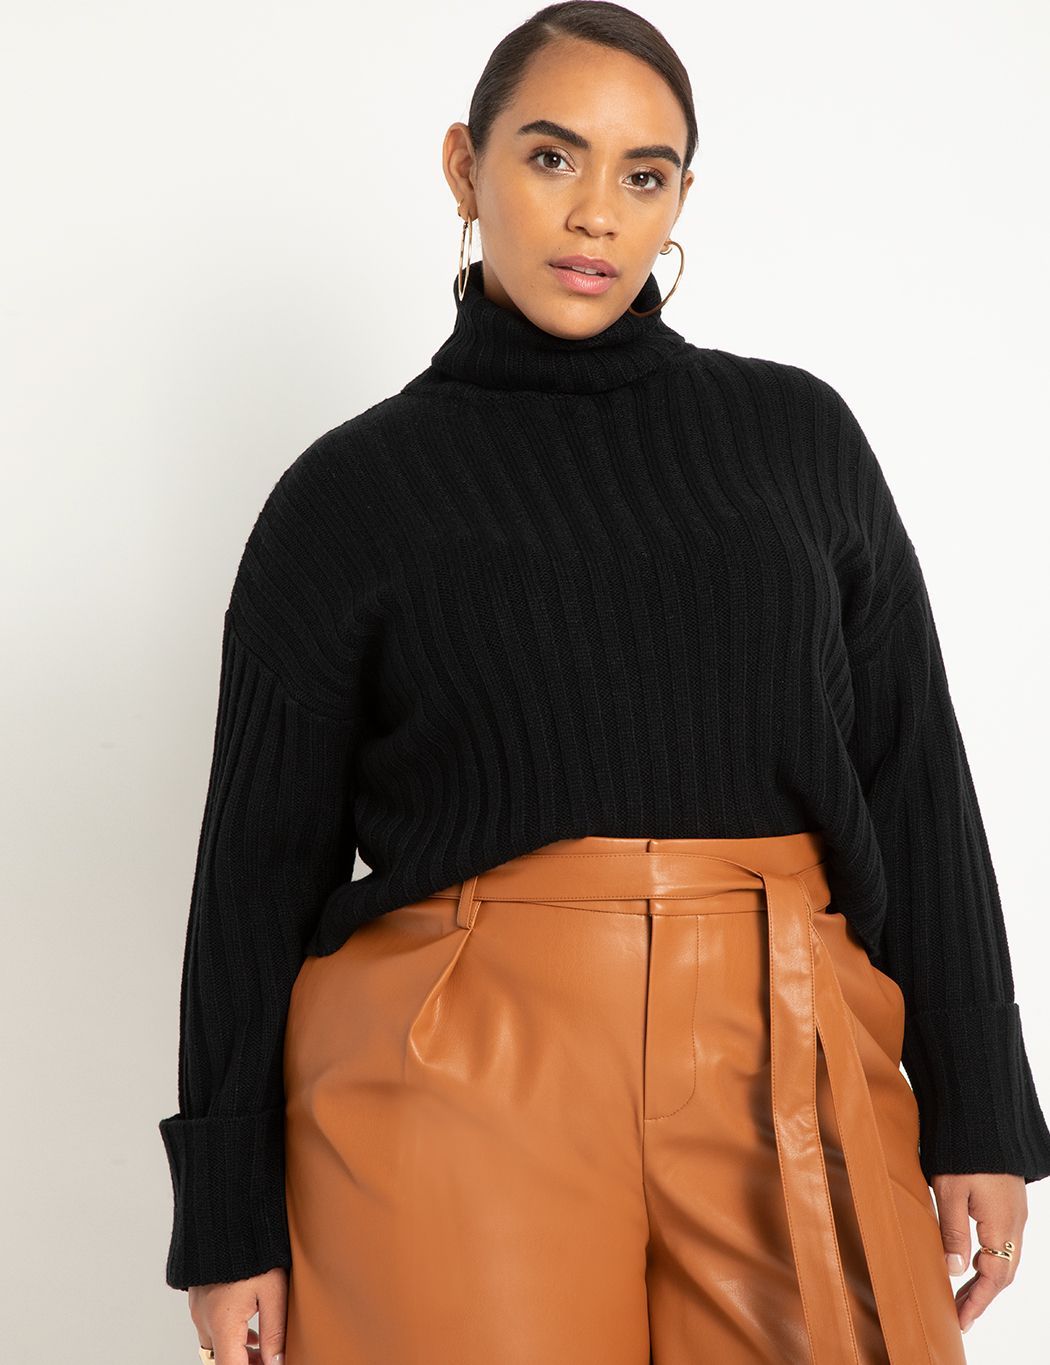 Cropped Turtleneck With Roll Cuff | Eloquii